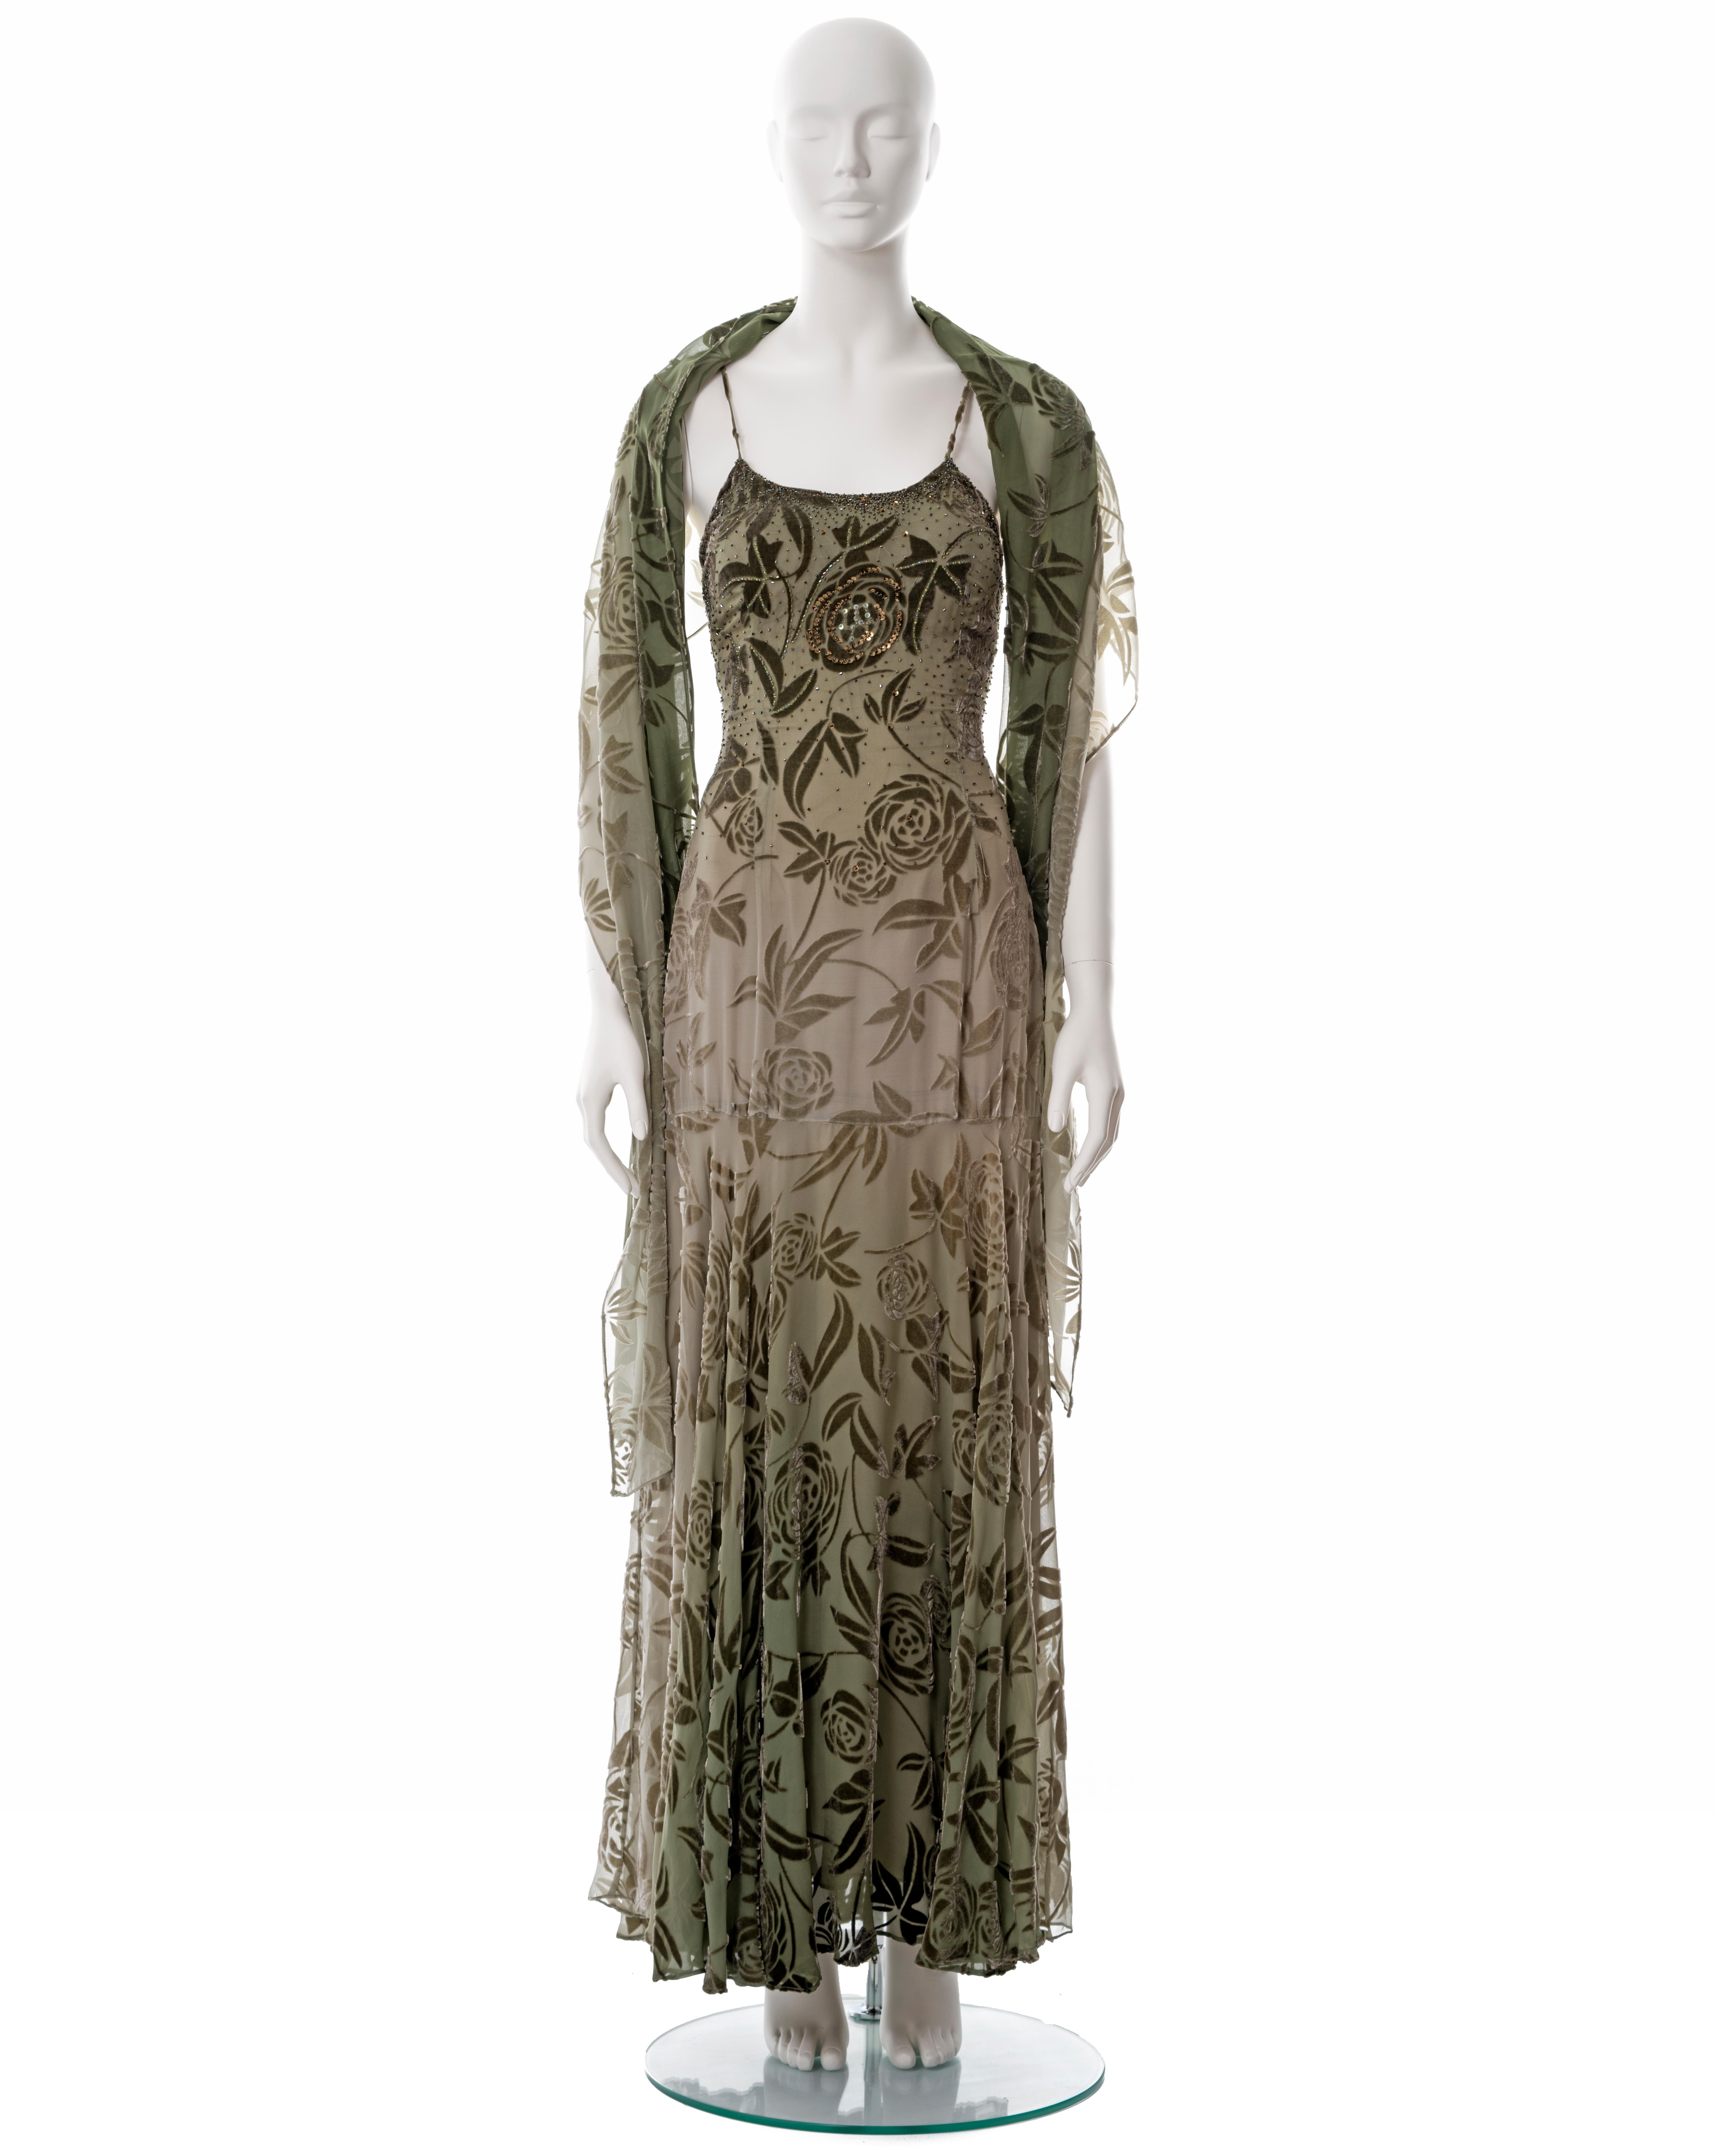 ▪ Diane Freis green beaded floral velvet devoré evening dress and shawl
▪ Sold by One of a Kind Archive
▪ c. 2000
▪ Hand beaded 
▪ Matching shawl
▪ Acetate lining 
▪ FR 40 - UK 12 - US 8

All photographs in this listing EXCLUDING any reference or